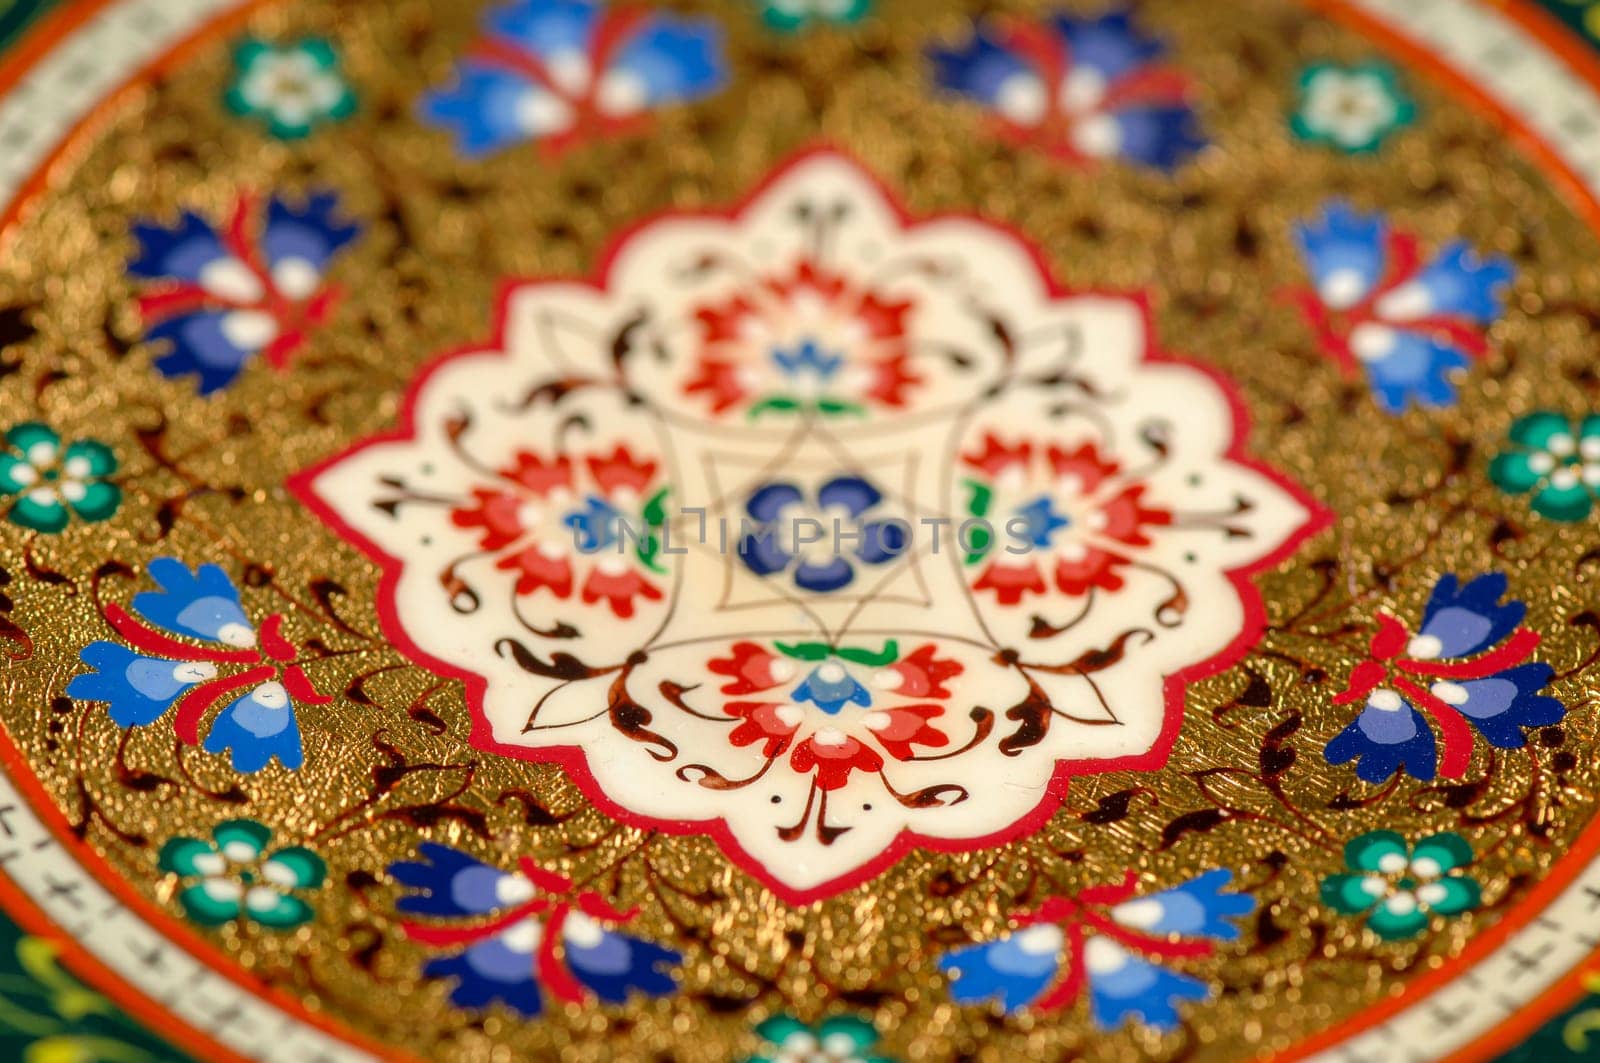 A closeup of a colorful artistic painting on a plate